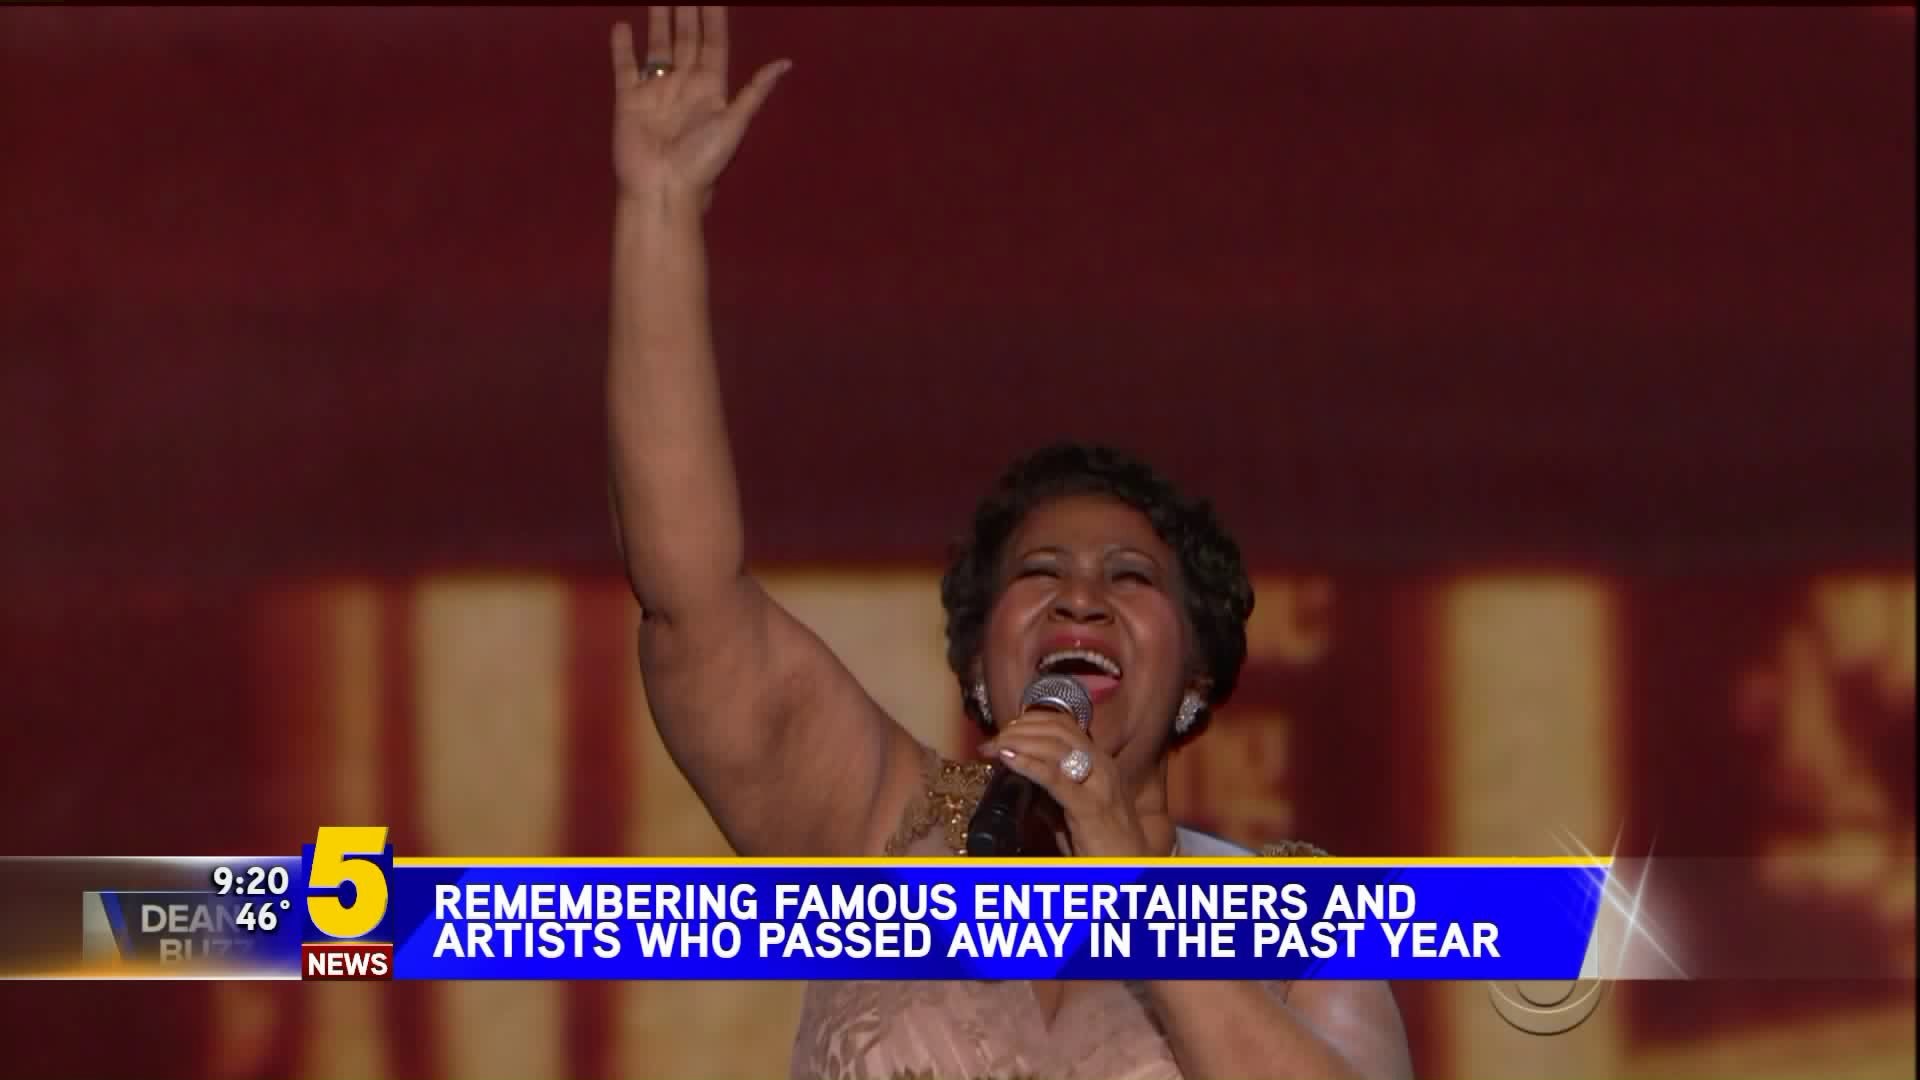 Remembering famous entertainers and artists who passed away in the past year